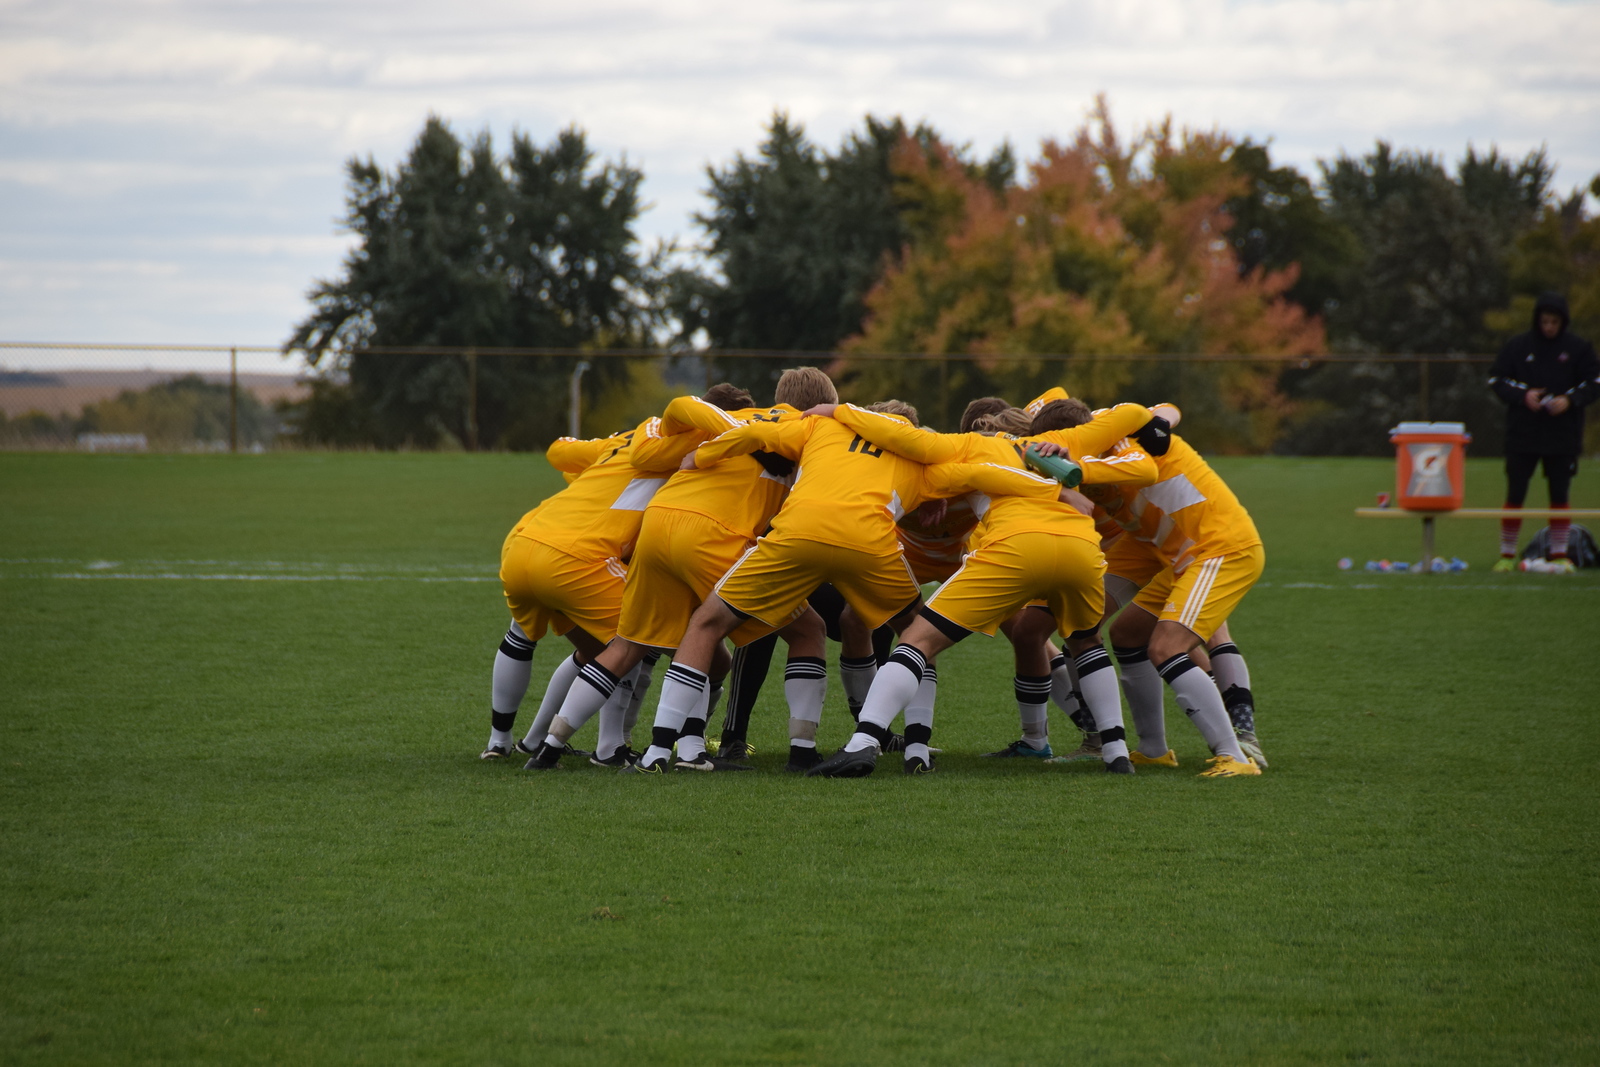 A picture of Dordt's soccer team during a huddle